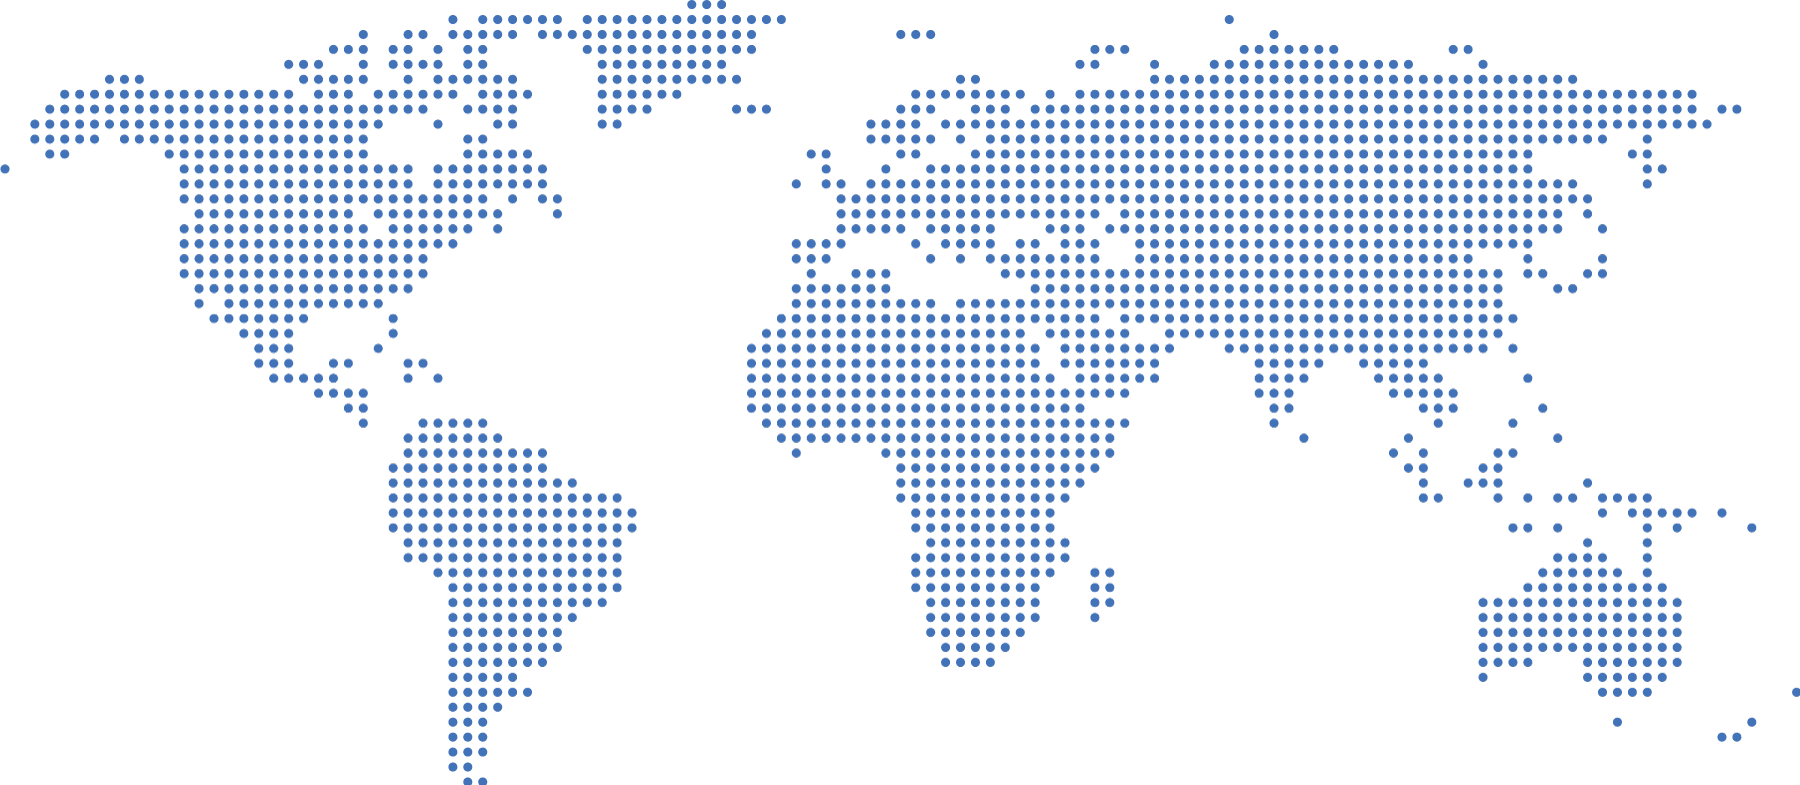 Stylized world flat graphic composed of blue dots.